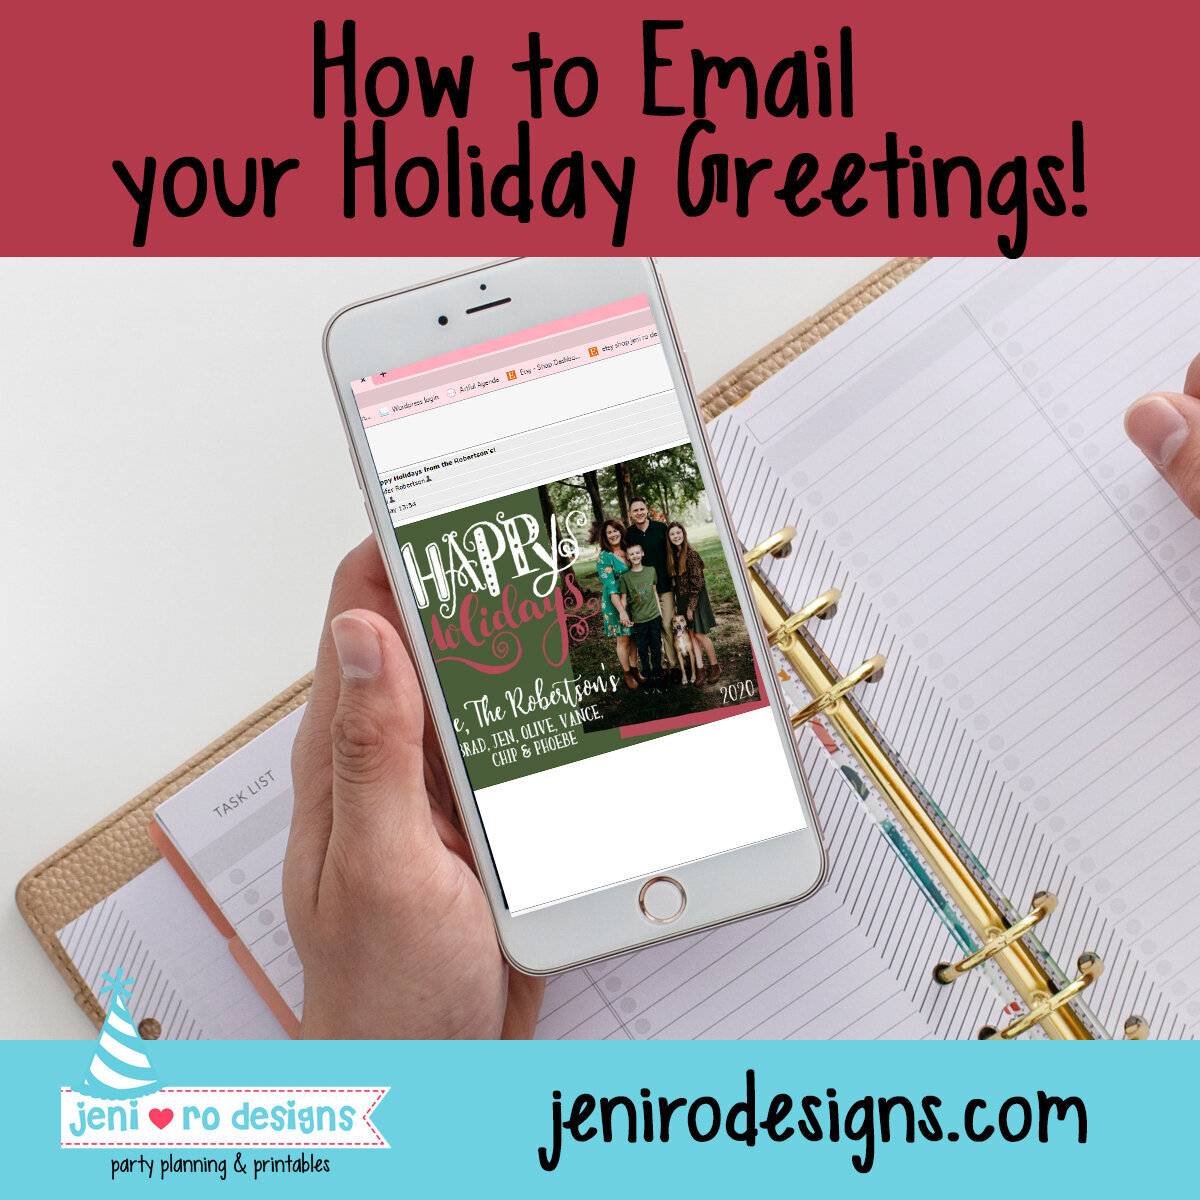 embed holiday card on email